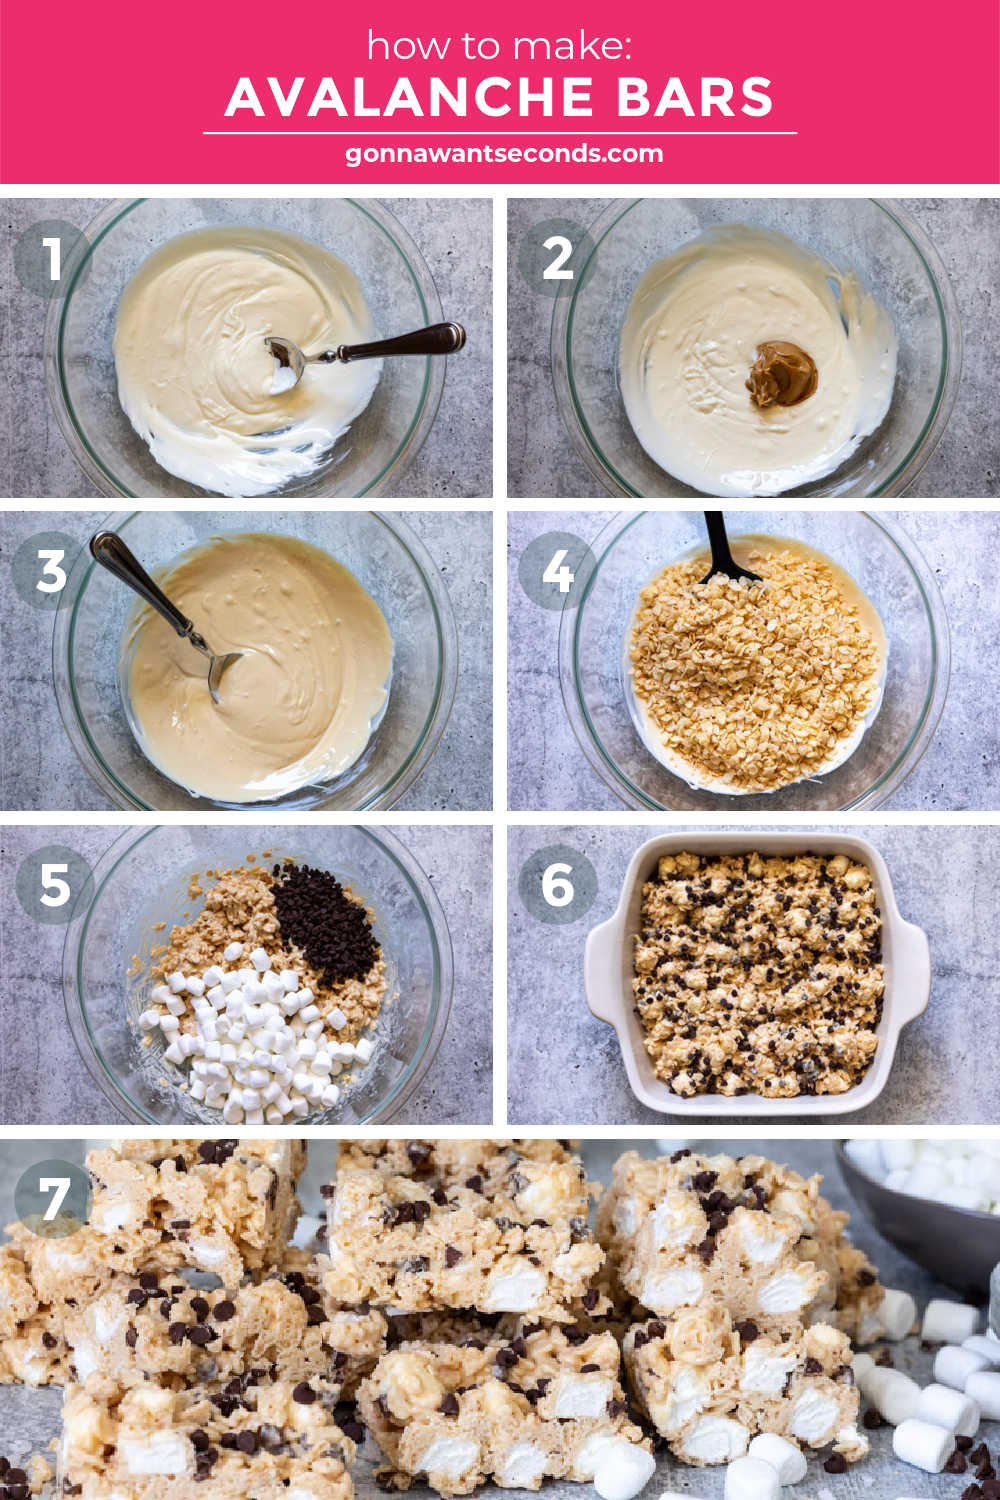 Step by step How to make avalanche bars